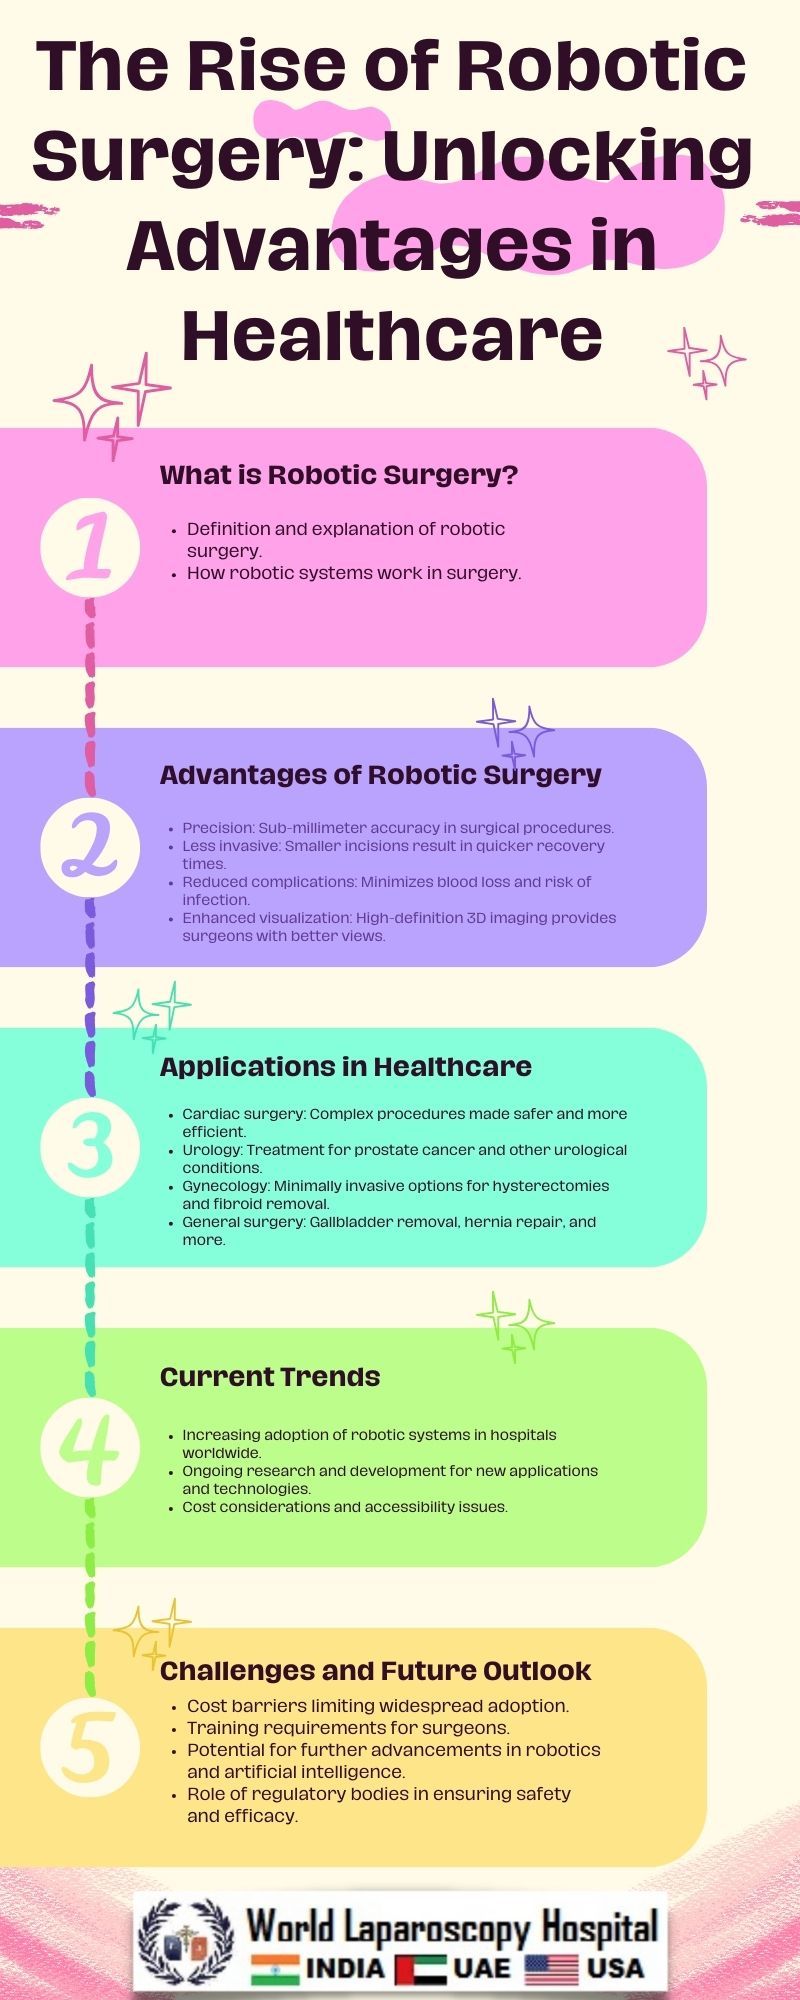 The Rise of Robotic Surgery: Unlocking Advantages in Healthcare